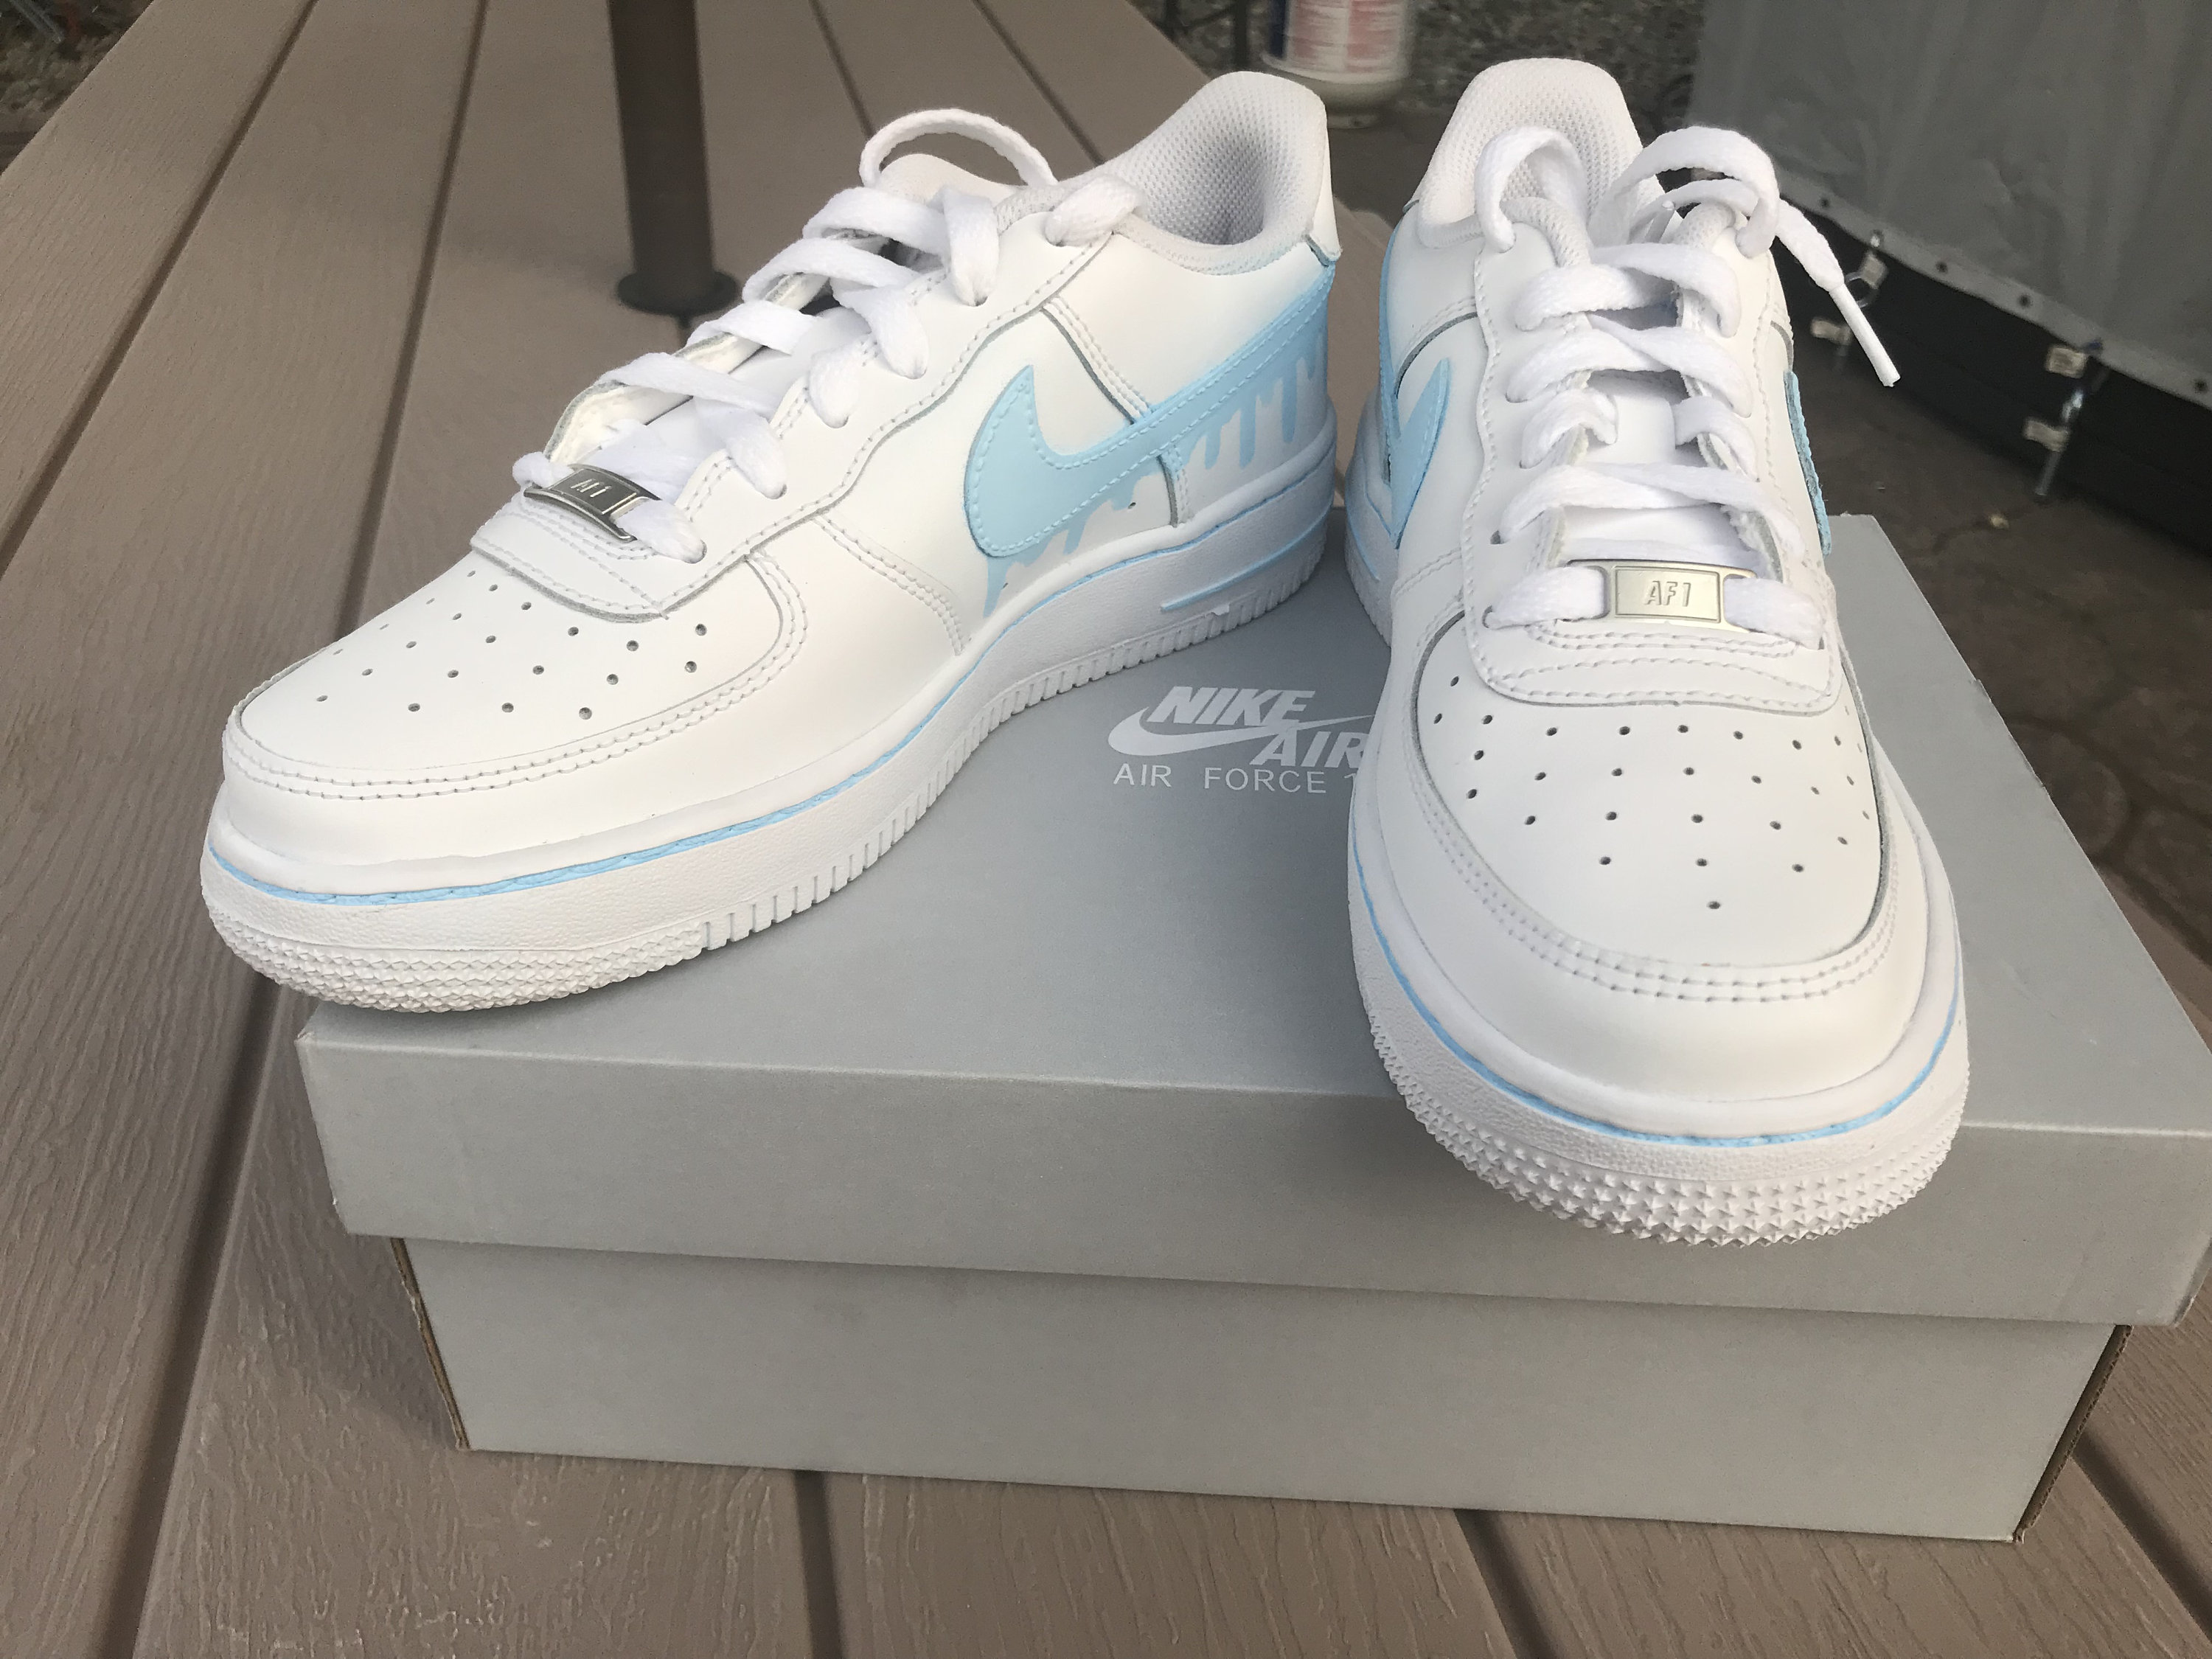 Painted Nike Air Force 1 Drip Painted Women Nikes Drip | Etsy